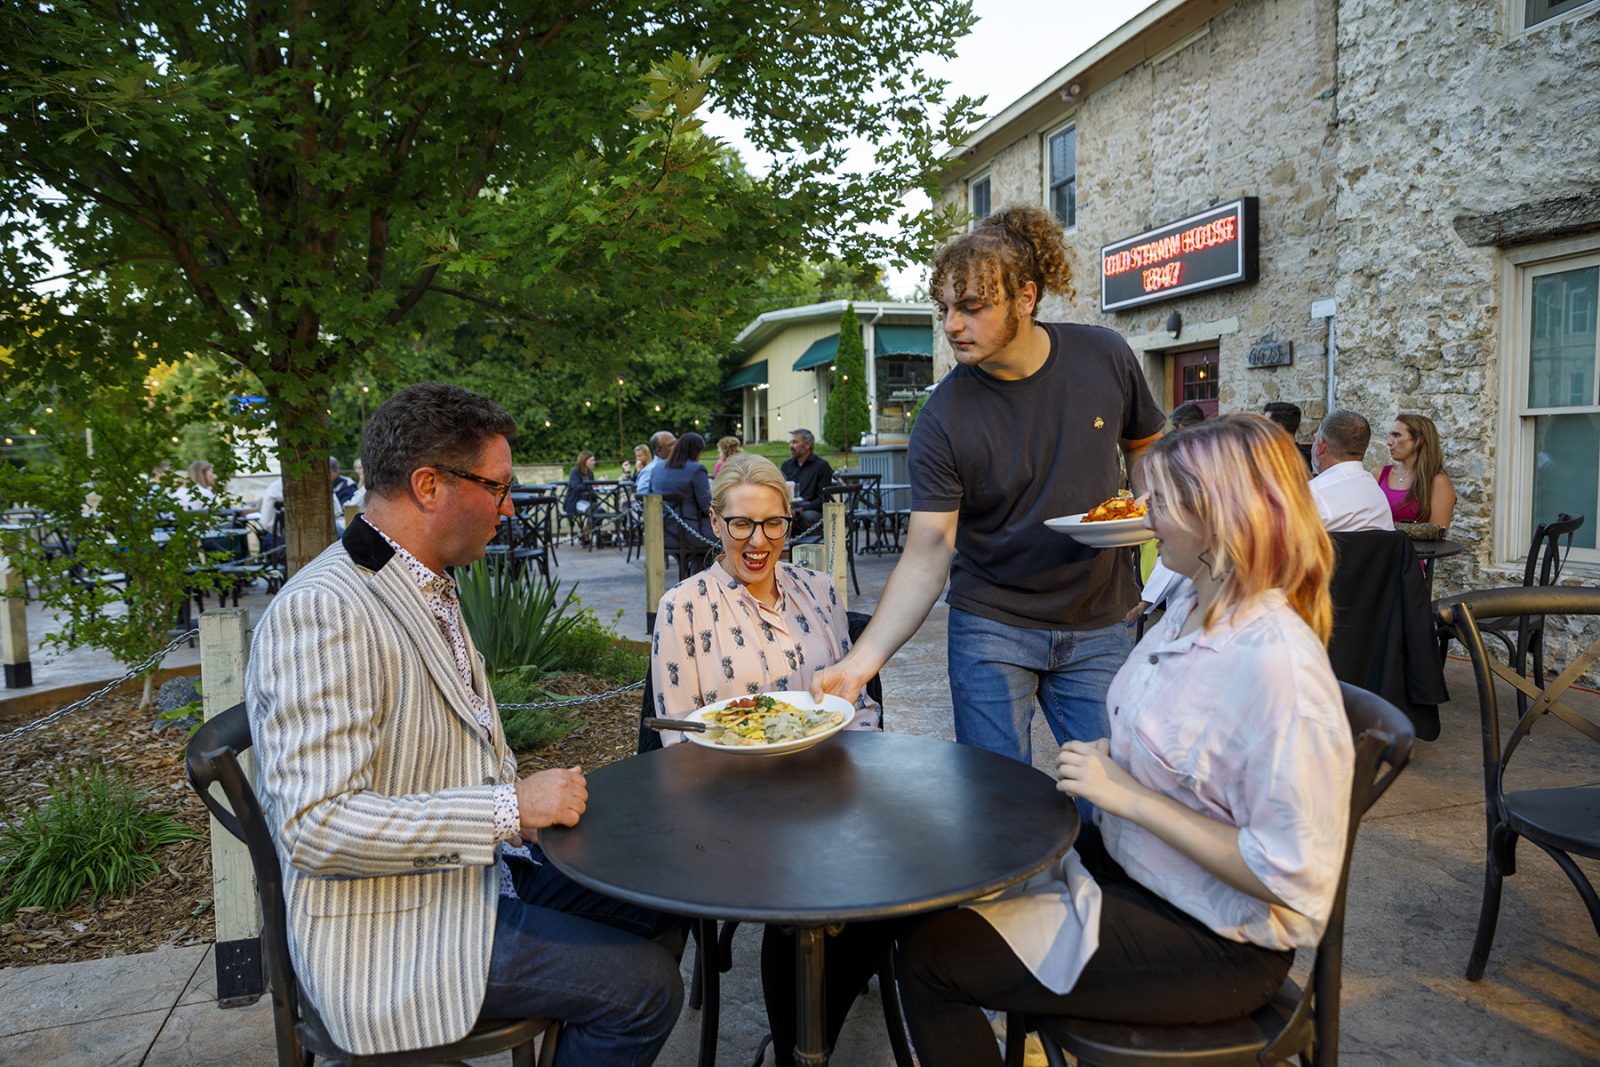 A group of people sitting at a table in an outdoor restaurant.